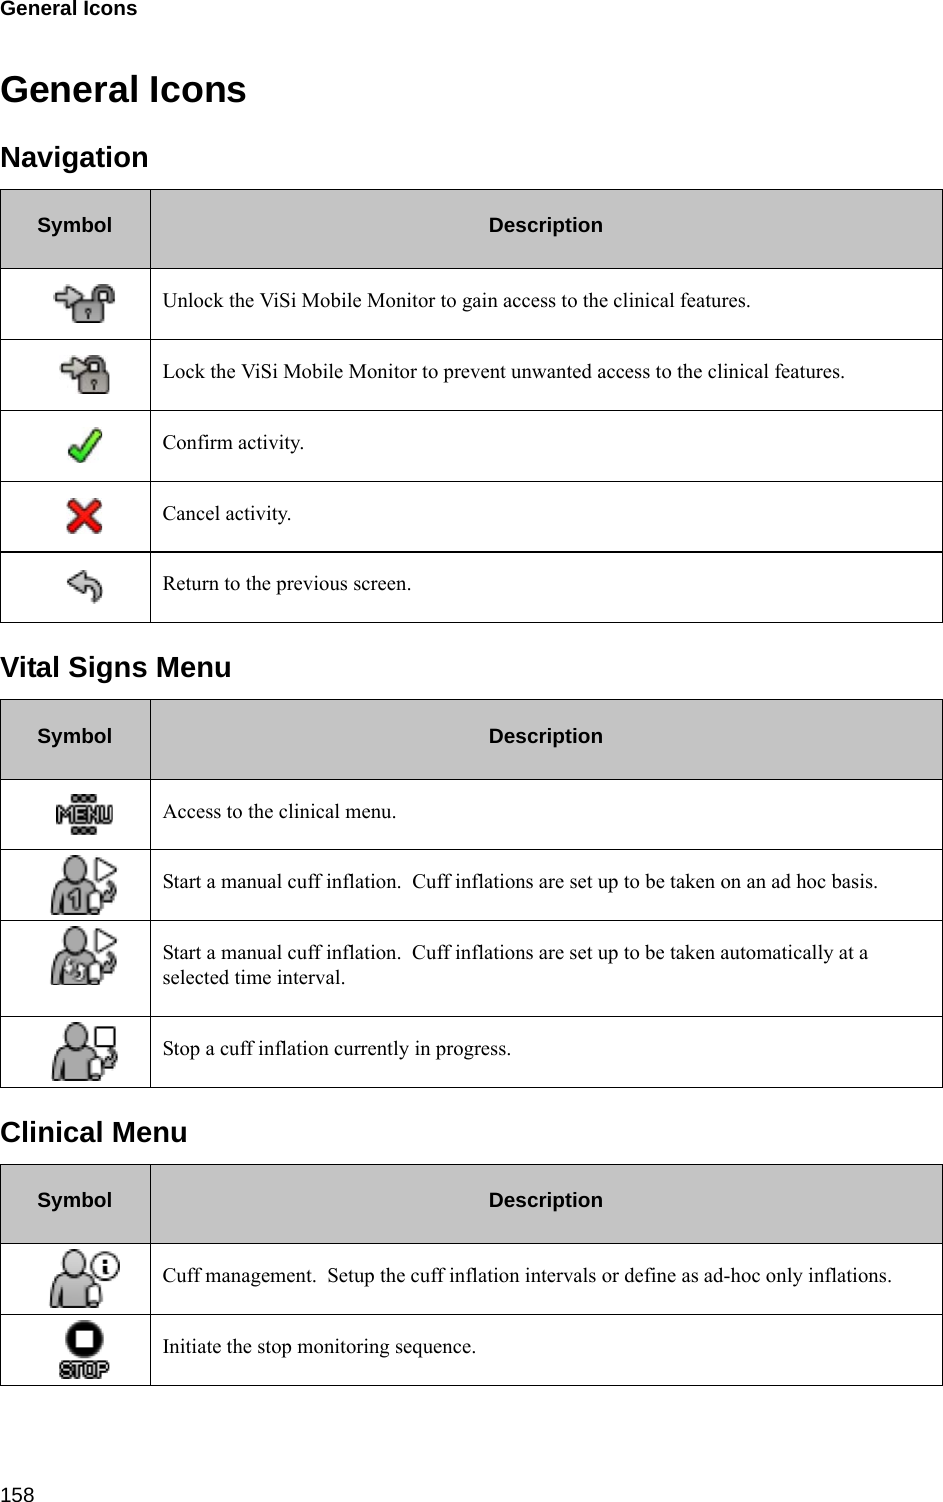 General Icons 158General IconsNavigationVital Signs MenuClinical MenuSymbol DescriptionUnlock the ViSi Mobile Monitor to gain access to the clinical features.Lock the ViSi Mobile Monitor to prevent unwanted access to the clinical features.Confirm activity.Cancel activity.Return to the previous screen.Symbol DescriptionAccess to the clinical menu.Start a manual cuff inflation.  Cuff inflations are set up to be taken on an ad hoc basis.Start a manual cuff inflation.  Cuff inflations are set up to be taken automatically at a selected time interval.Stop a cuff inflation currently in progress.Symbol DescriptionCuff management.  Setup the cuff inflation intervals or define as ad-hoc only inflations.Initiate the stop monitoring sequence.